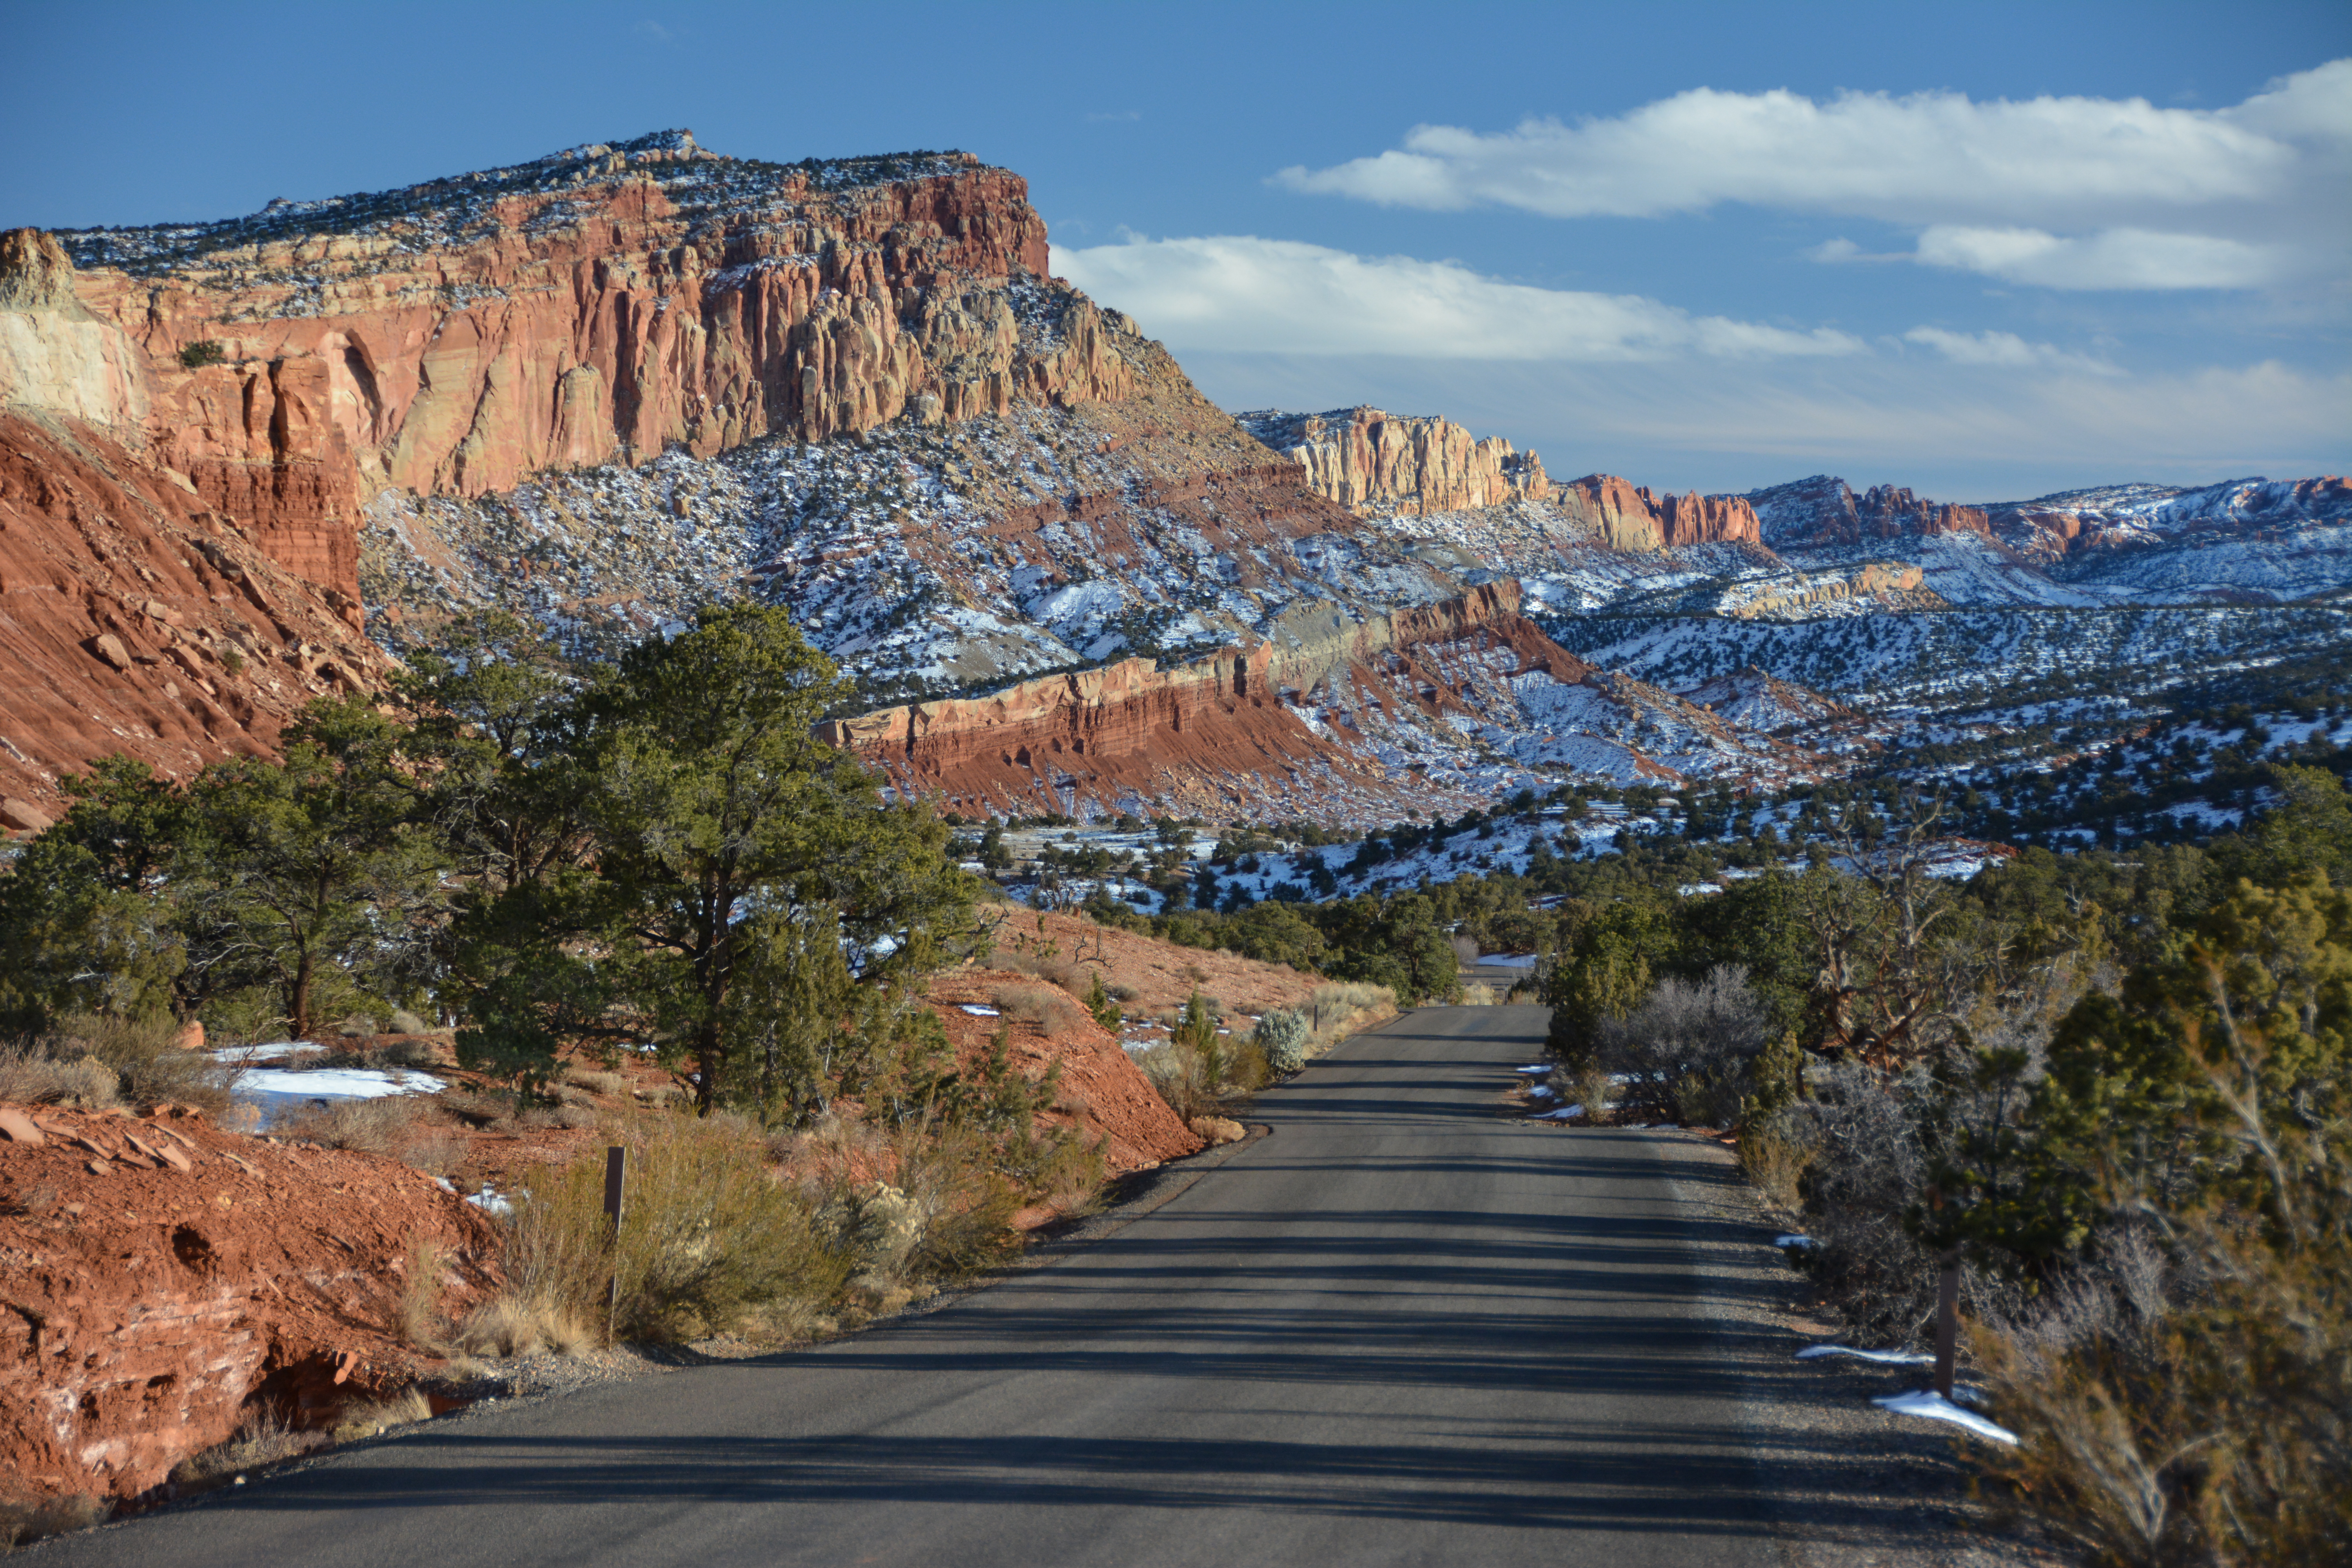 A road through red rock desert with a dusting of snow on the sandstone cliffs to the left side